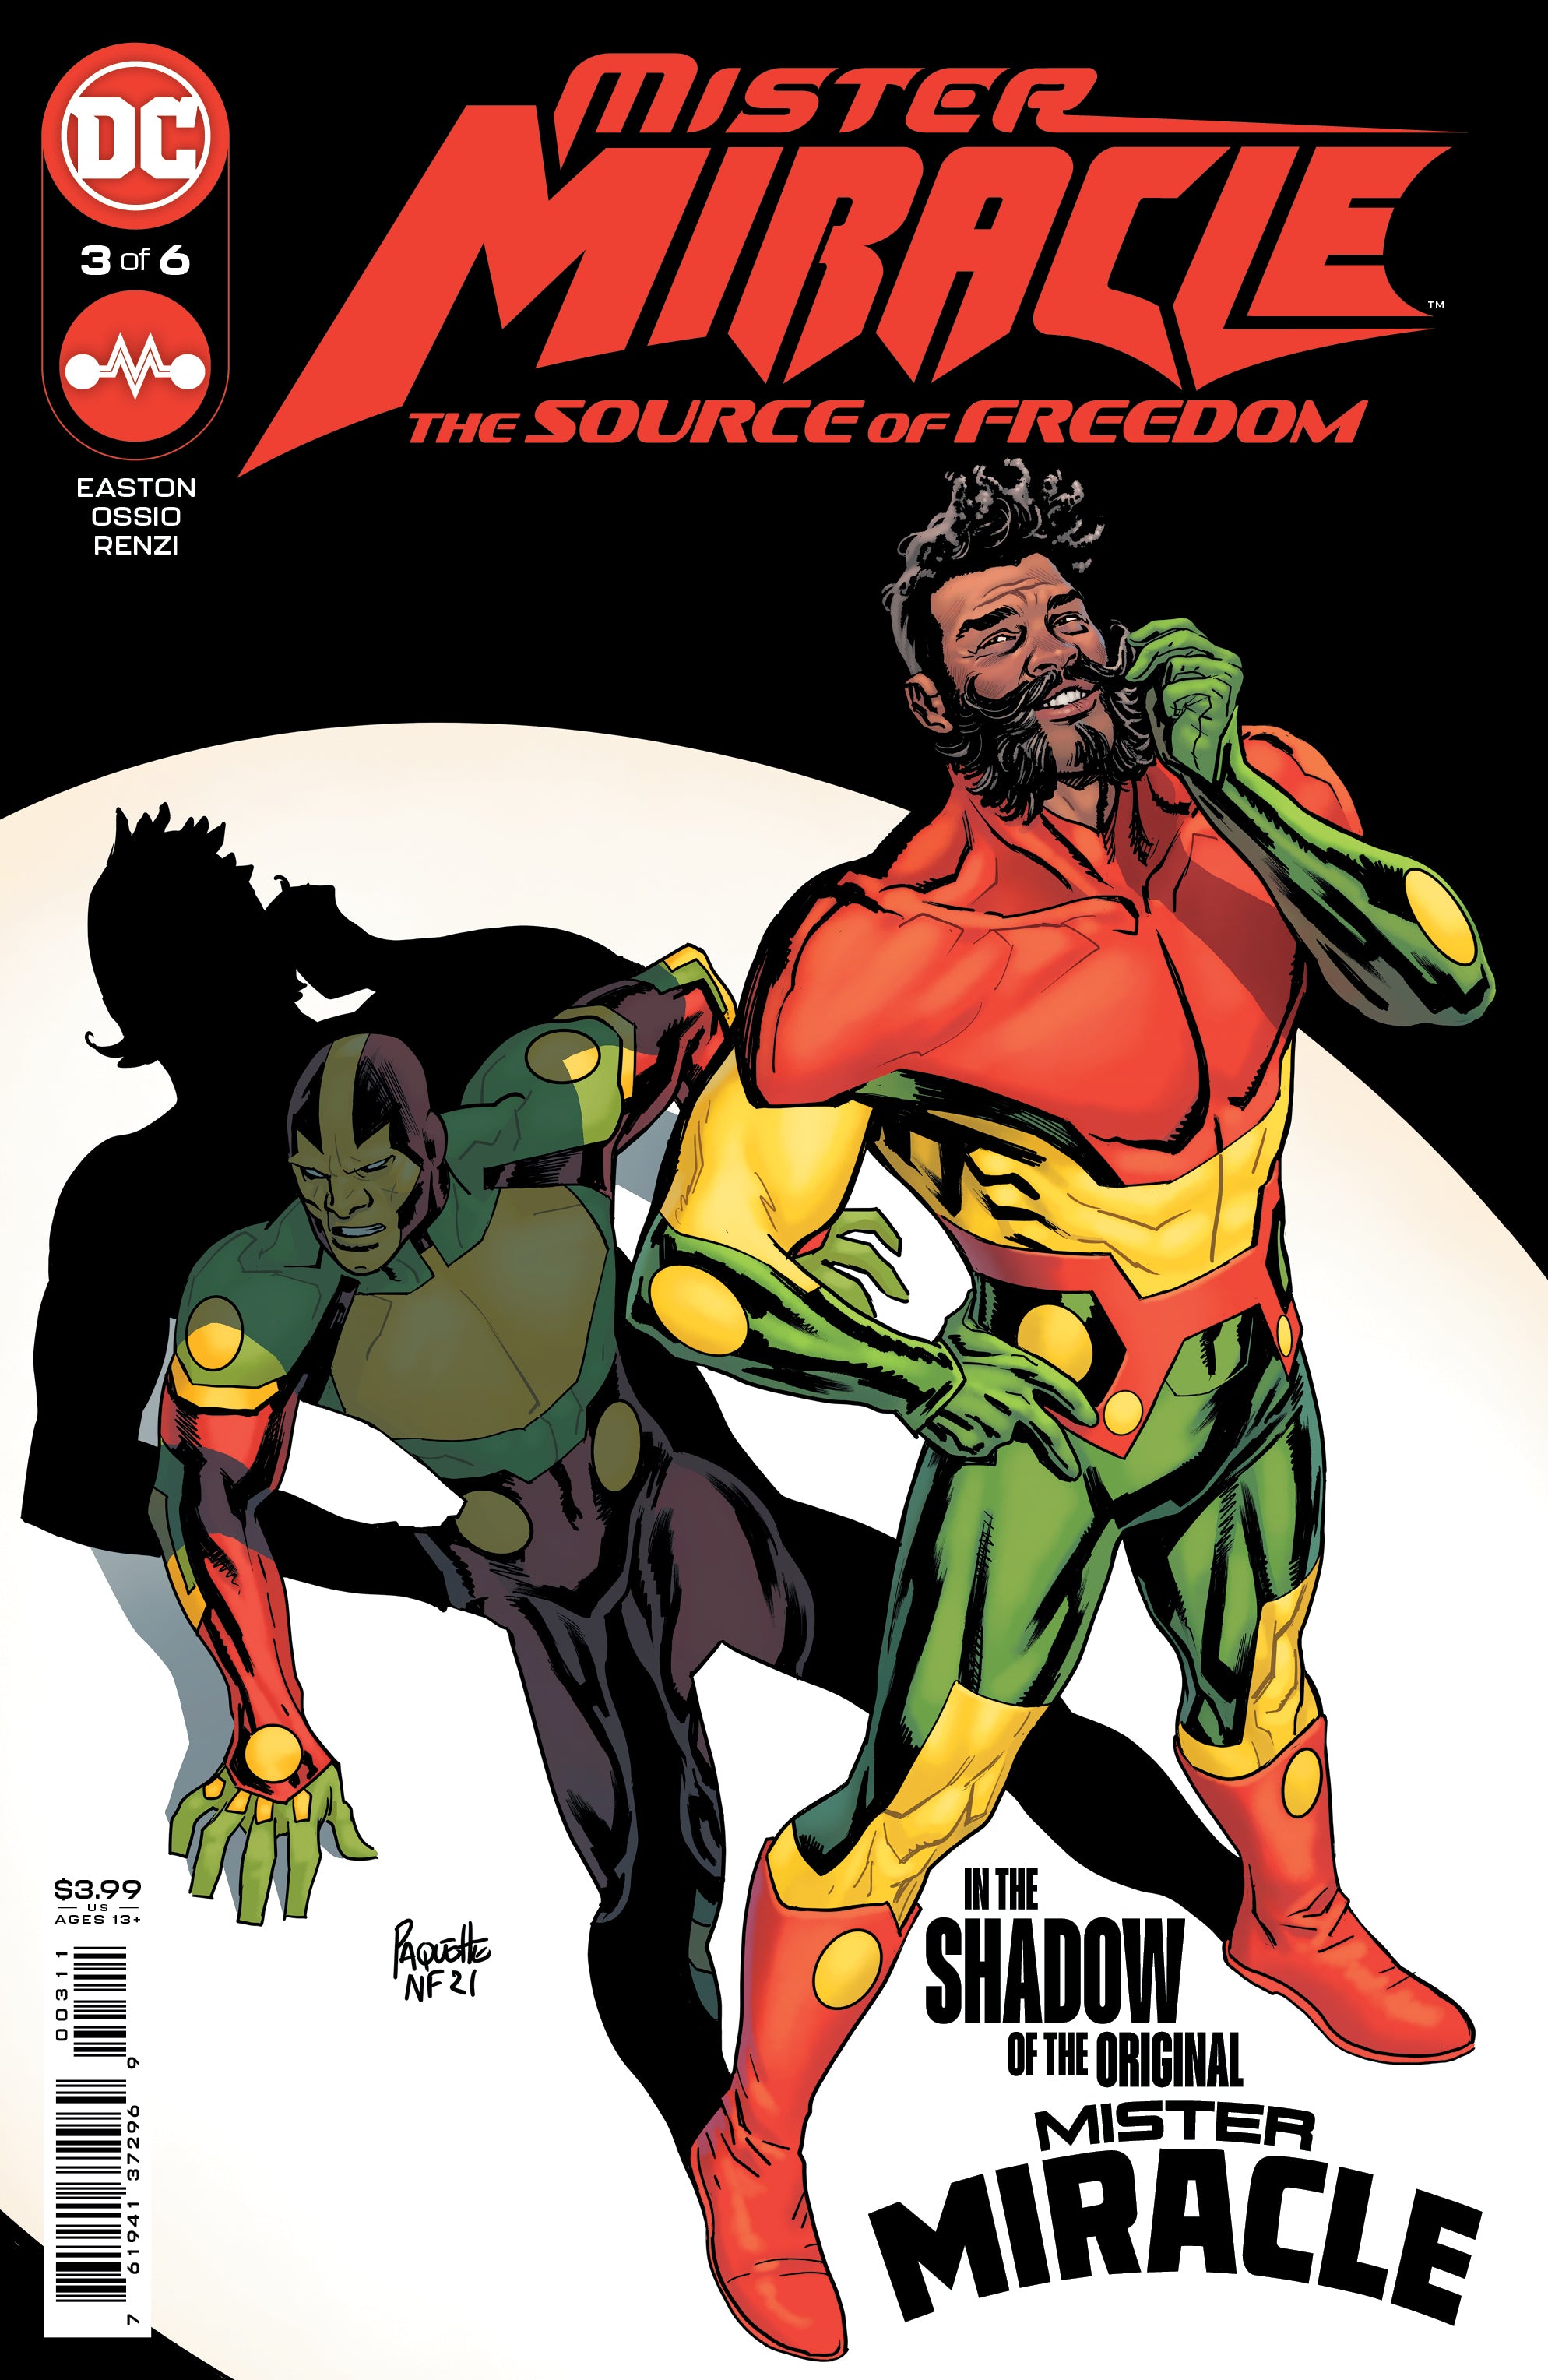 MISTER MIRACLE THE SOURCE OF FREEDOM #3 (OF 6) CVR A YANICK PAQUETTE